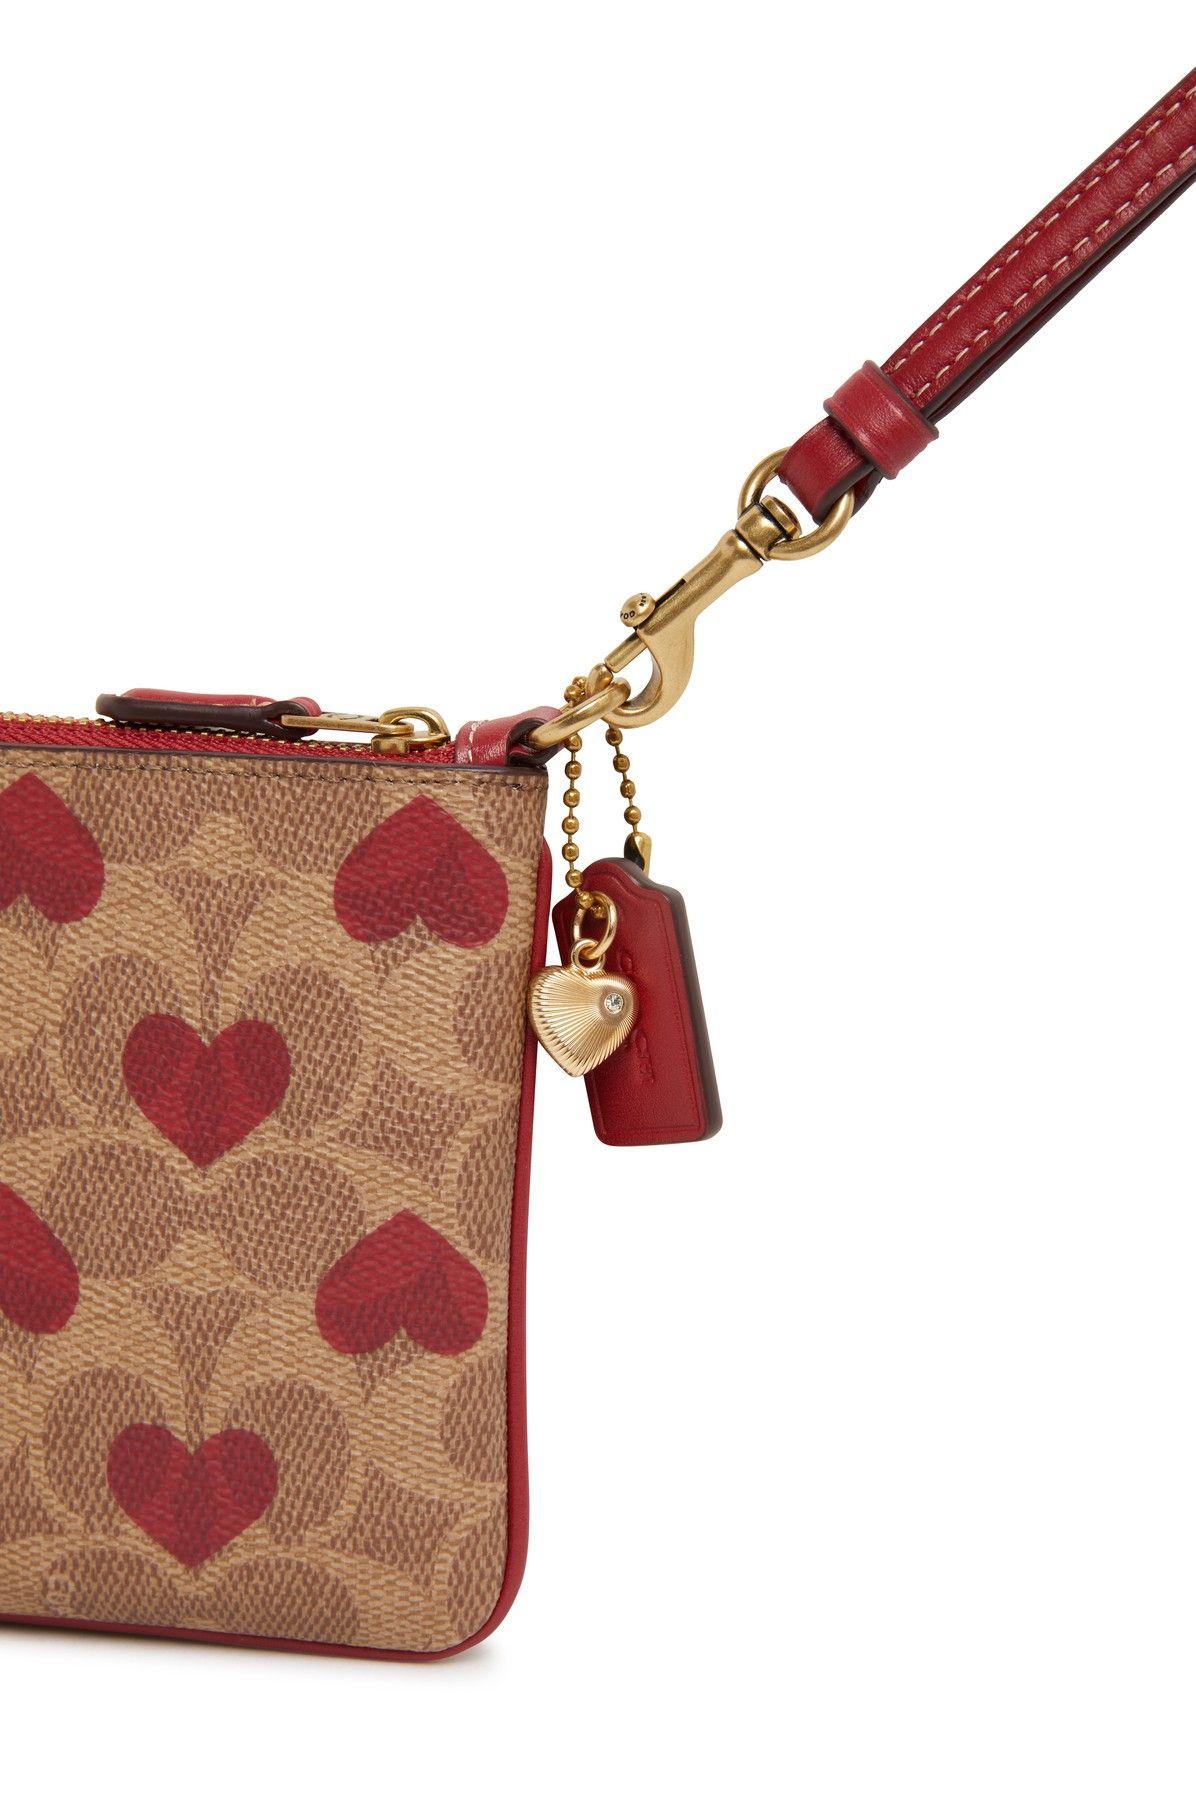 Coach Signature Coated Canvas with Heart Print Wristlet - Tan Red Apple